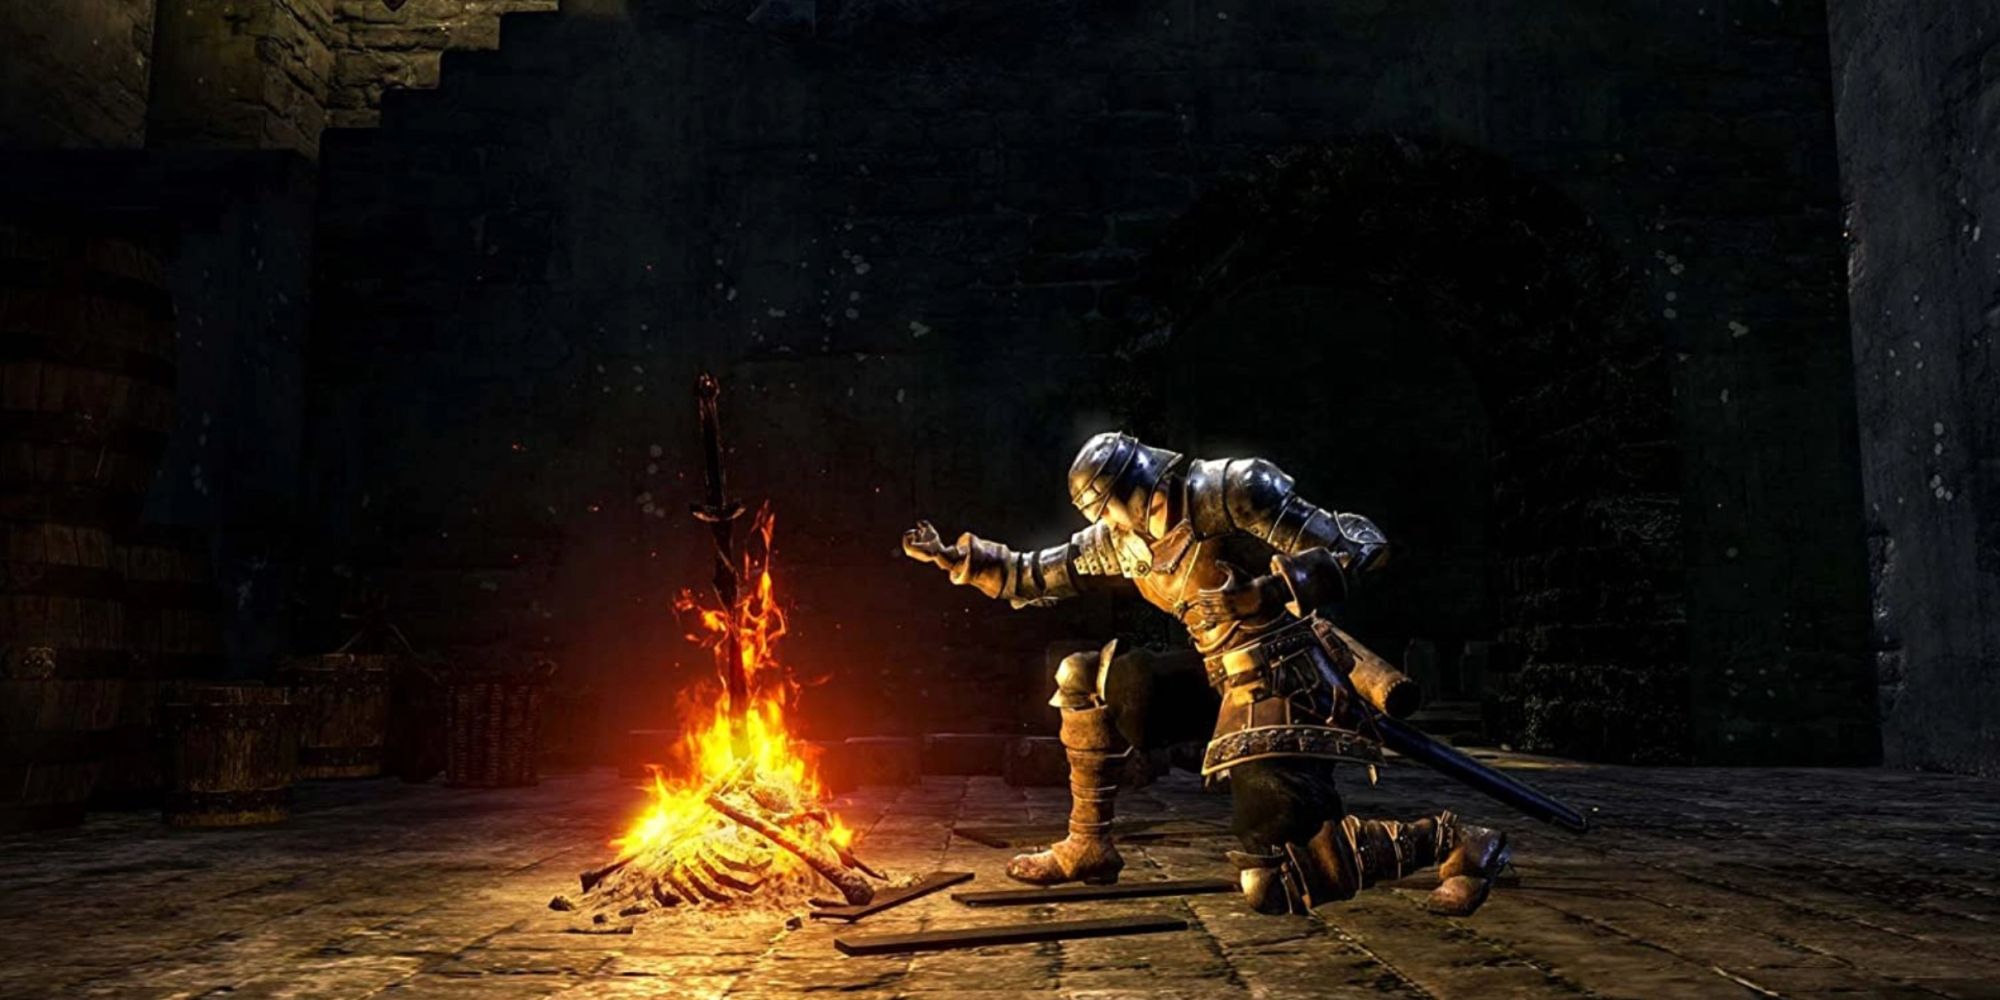 Dark Souls Bonfires are one of the most iconic save points of all time